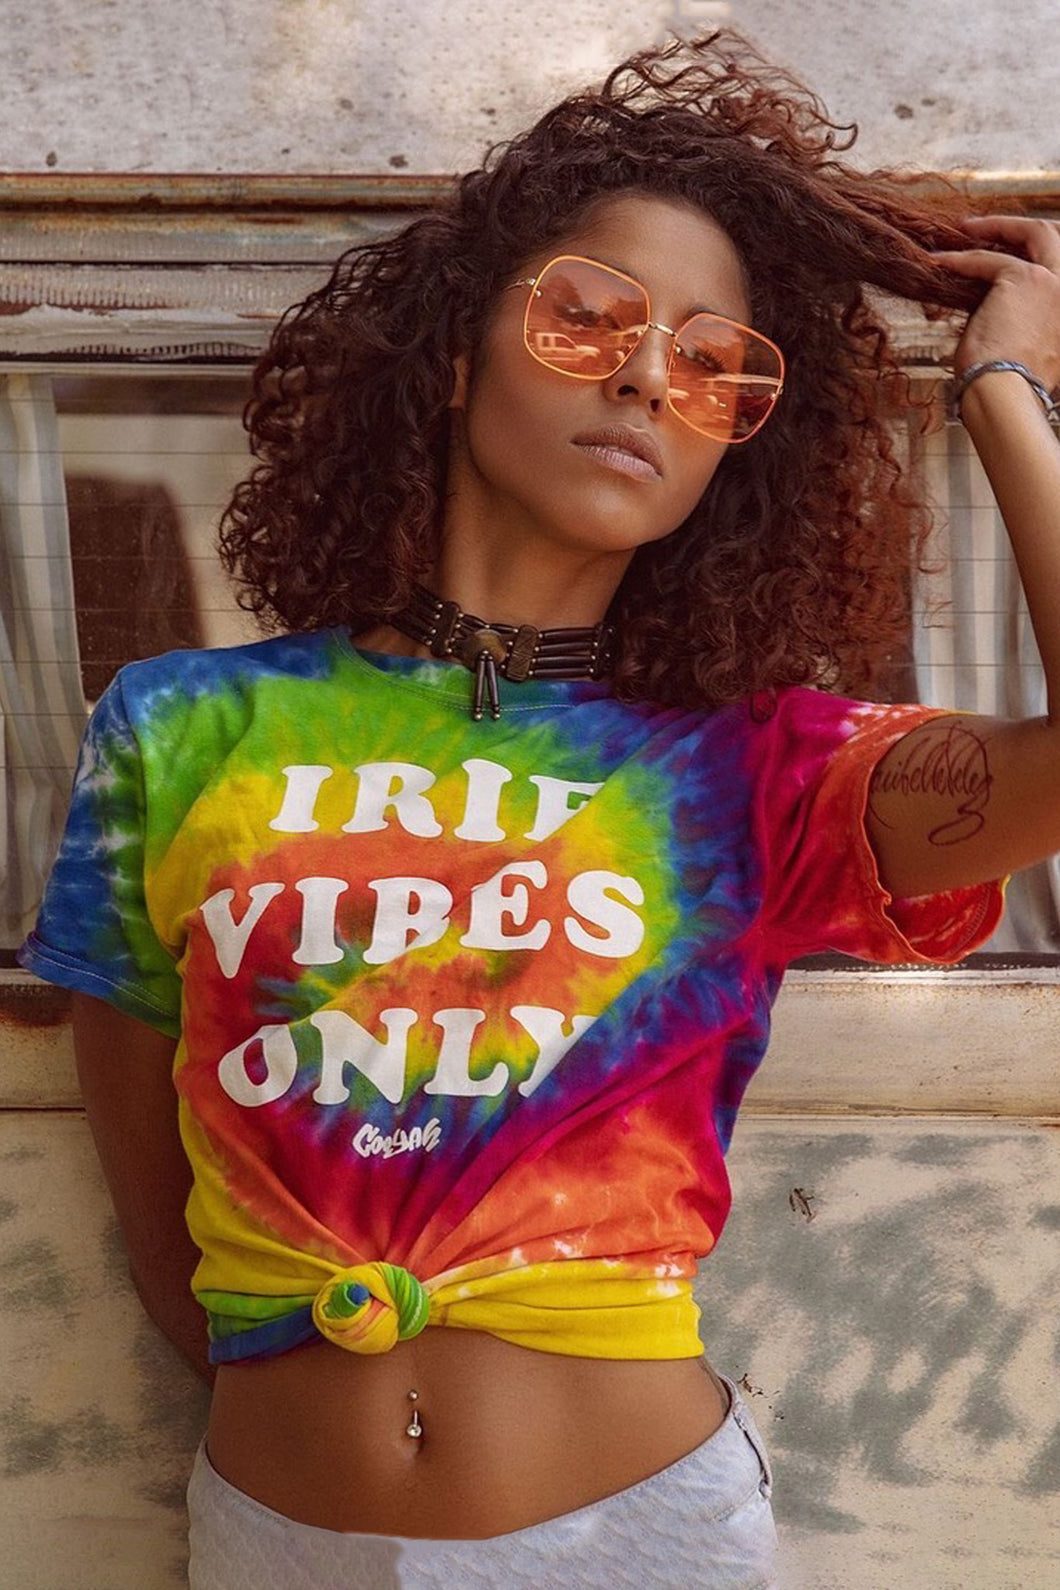 IRIE Vibes Only Tee.  Colorful women's tie-dye shirt.  Cooyah the official reggae clothing brand since 1987.  